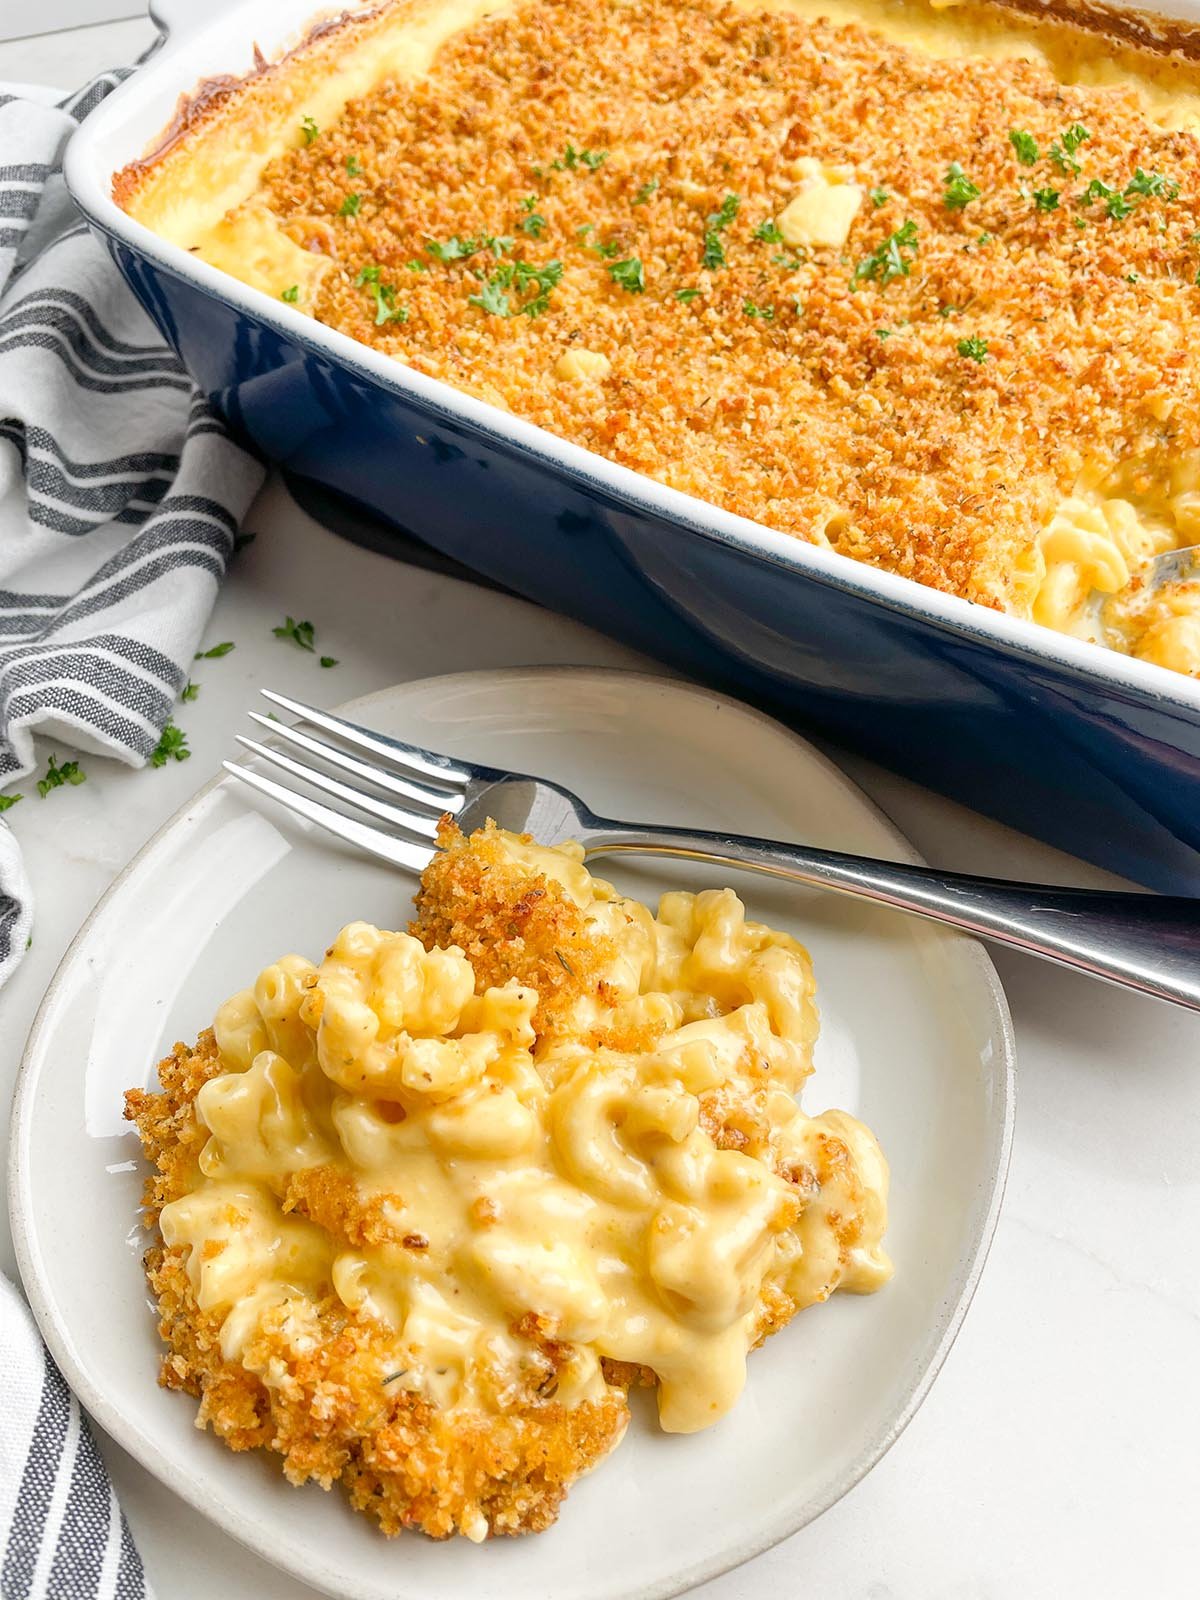 plate of macaroni and cheese next to casserole dish of macaroni and cheese with bread crumb topping.